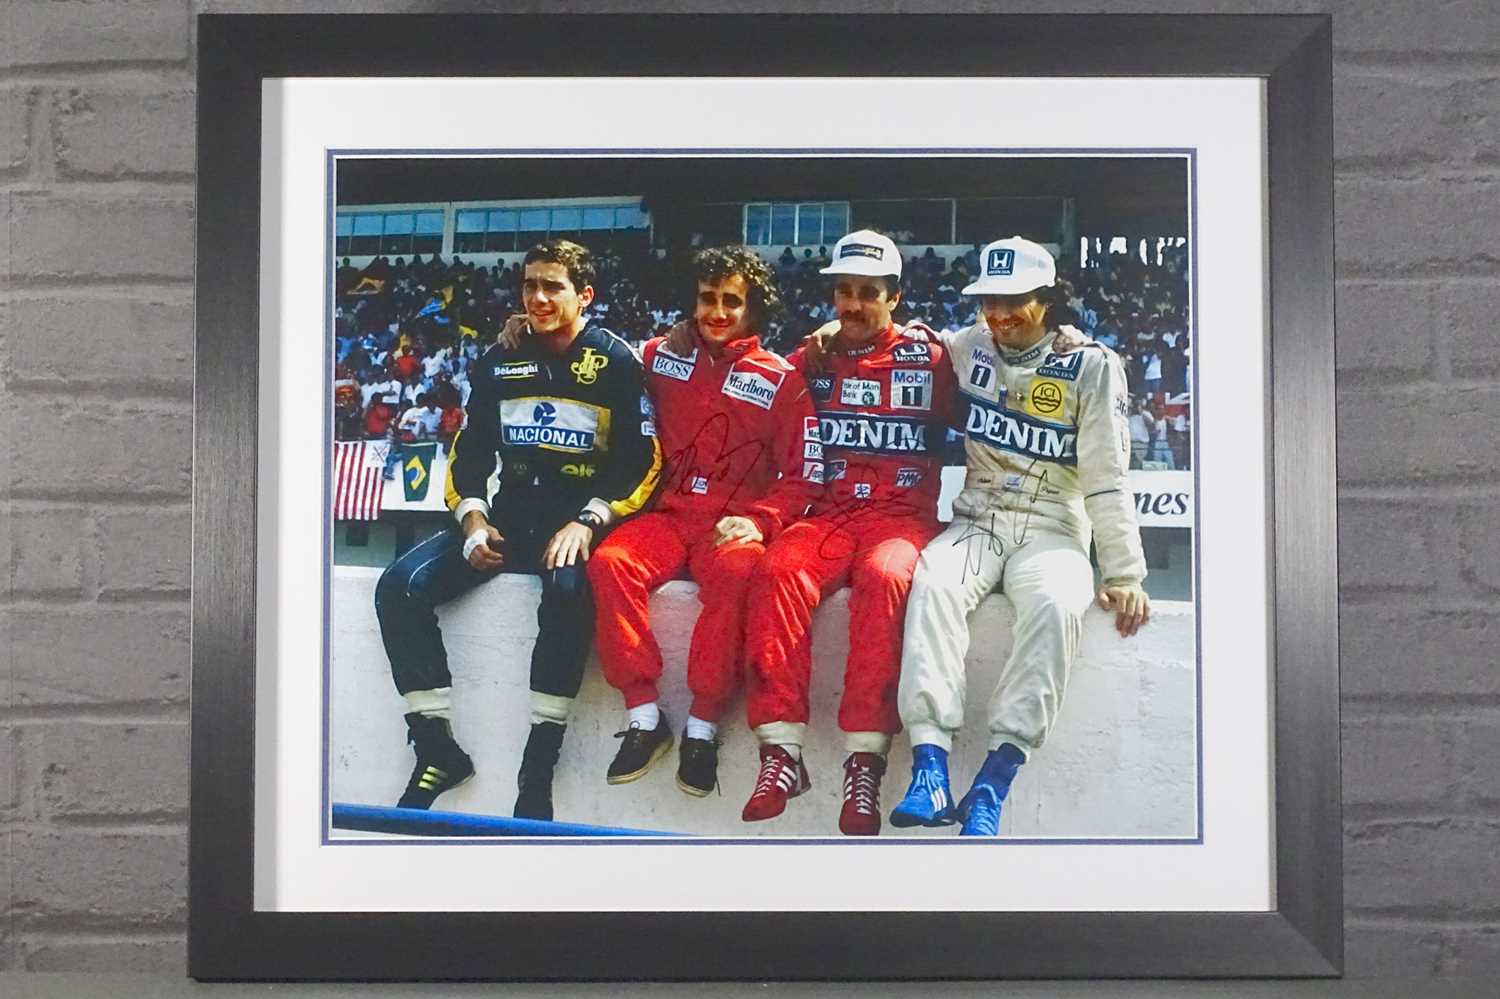 Lot 51 - Champions Wall framed print with authenticity signed by Prost, Mansell and Piquet